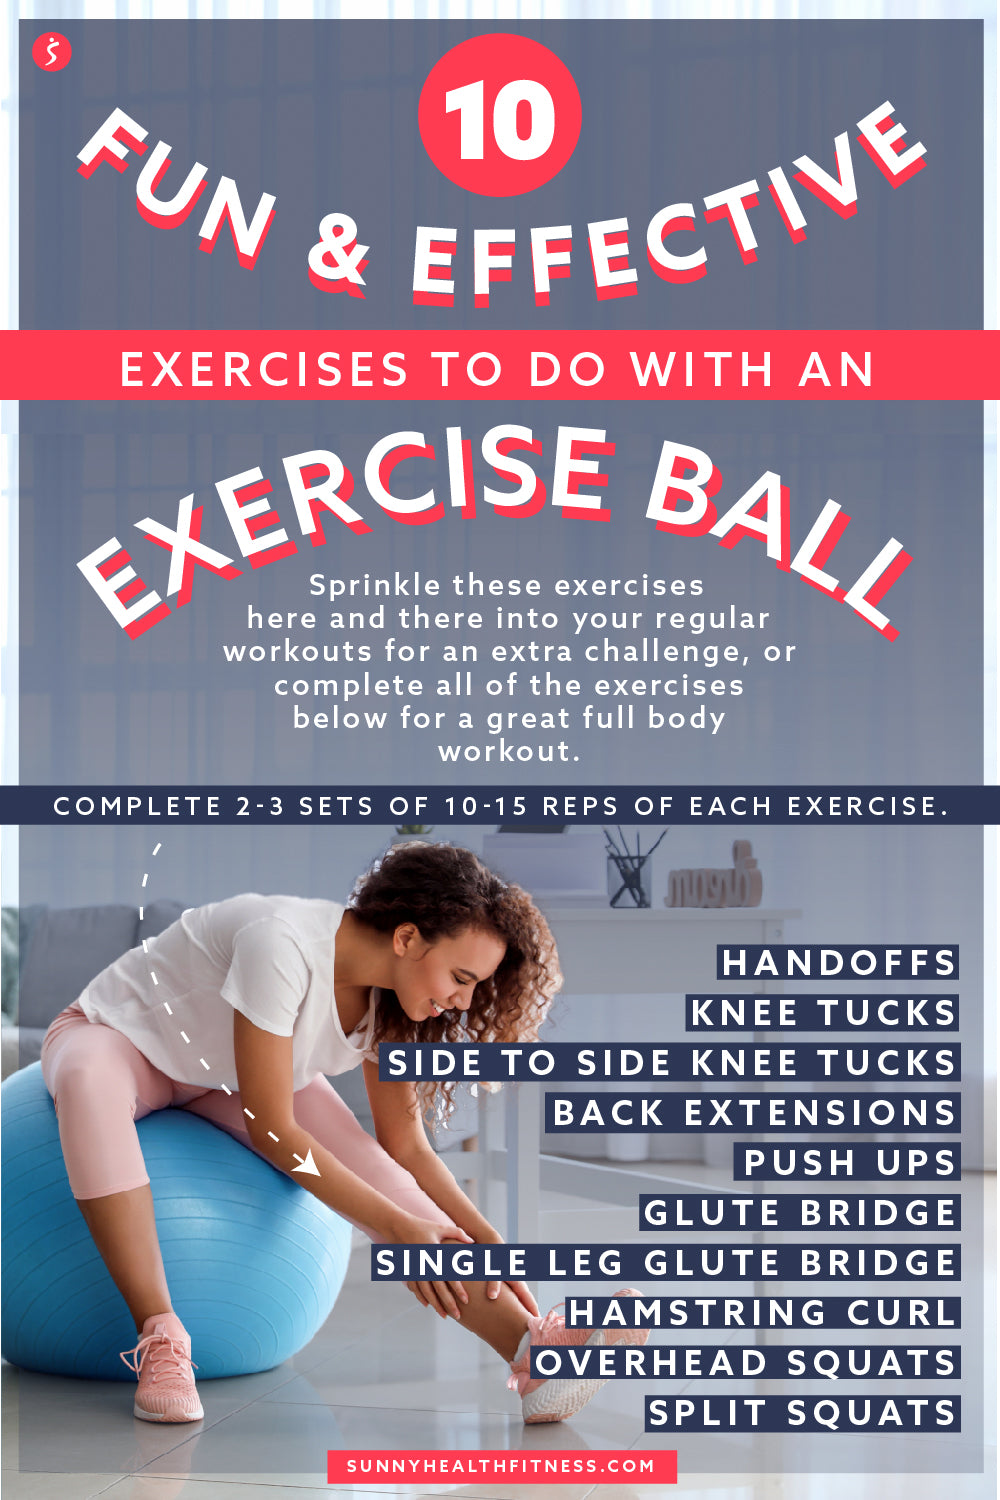 What Size Exercise Ball To Buy, According To A Trainer